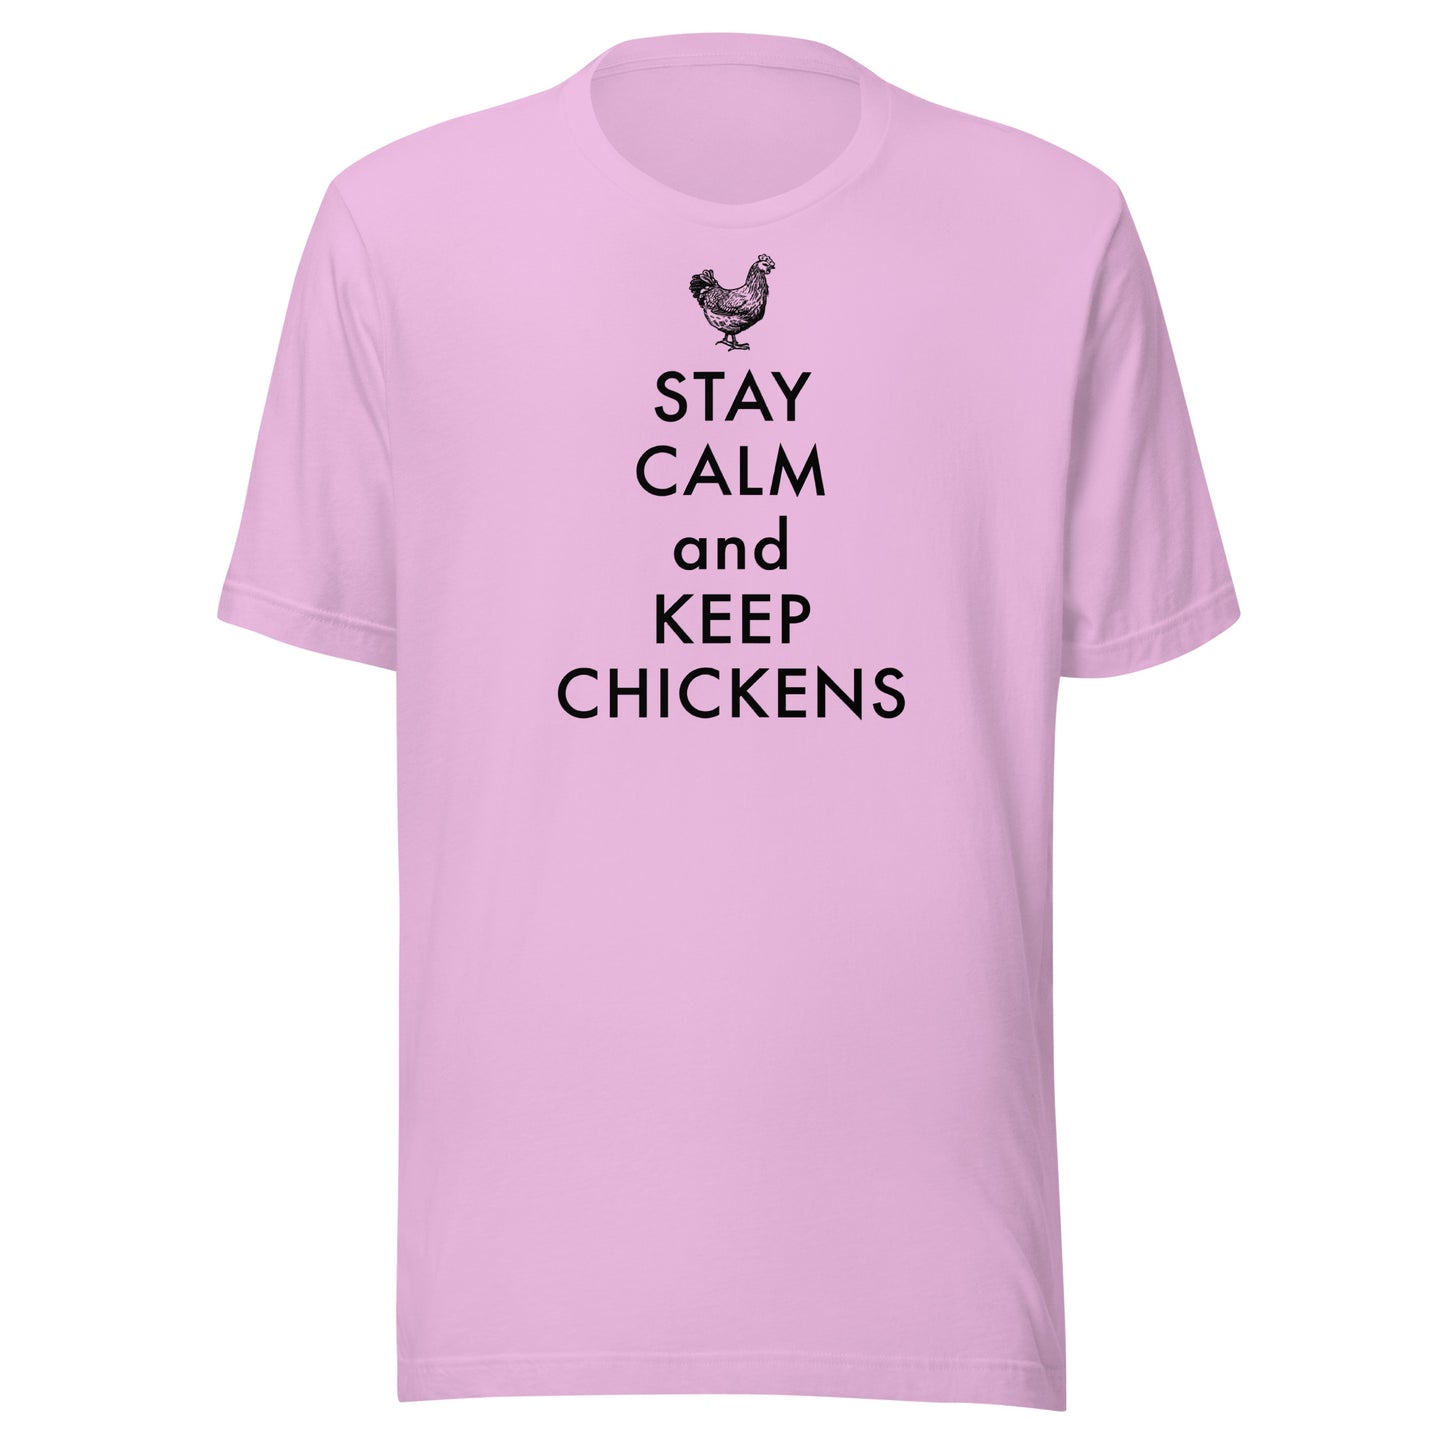 Stay Calm and Keep Chickens Unisex t-shirt